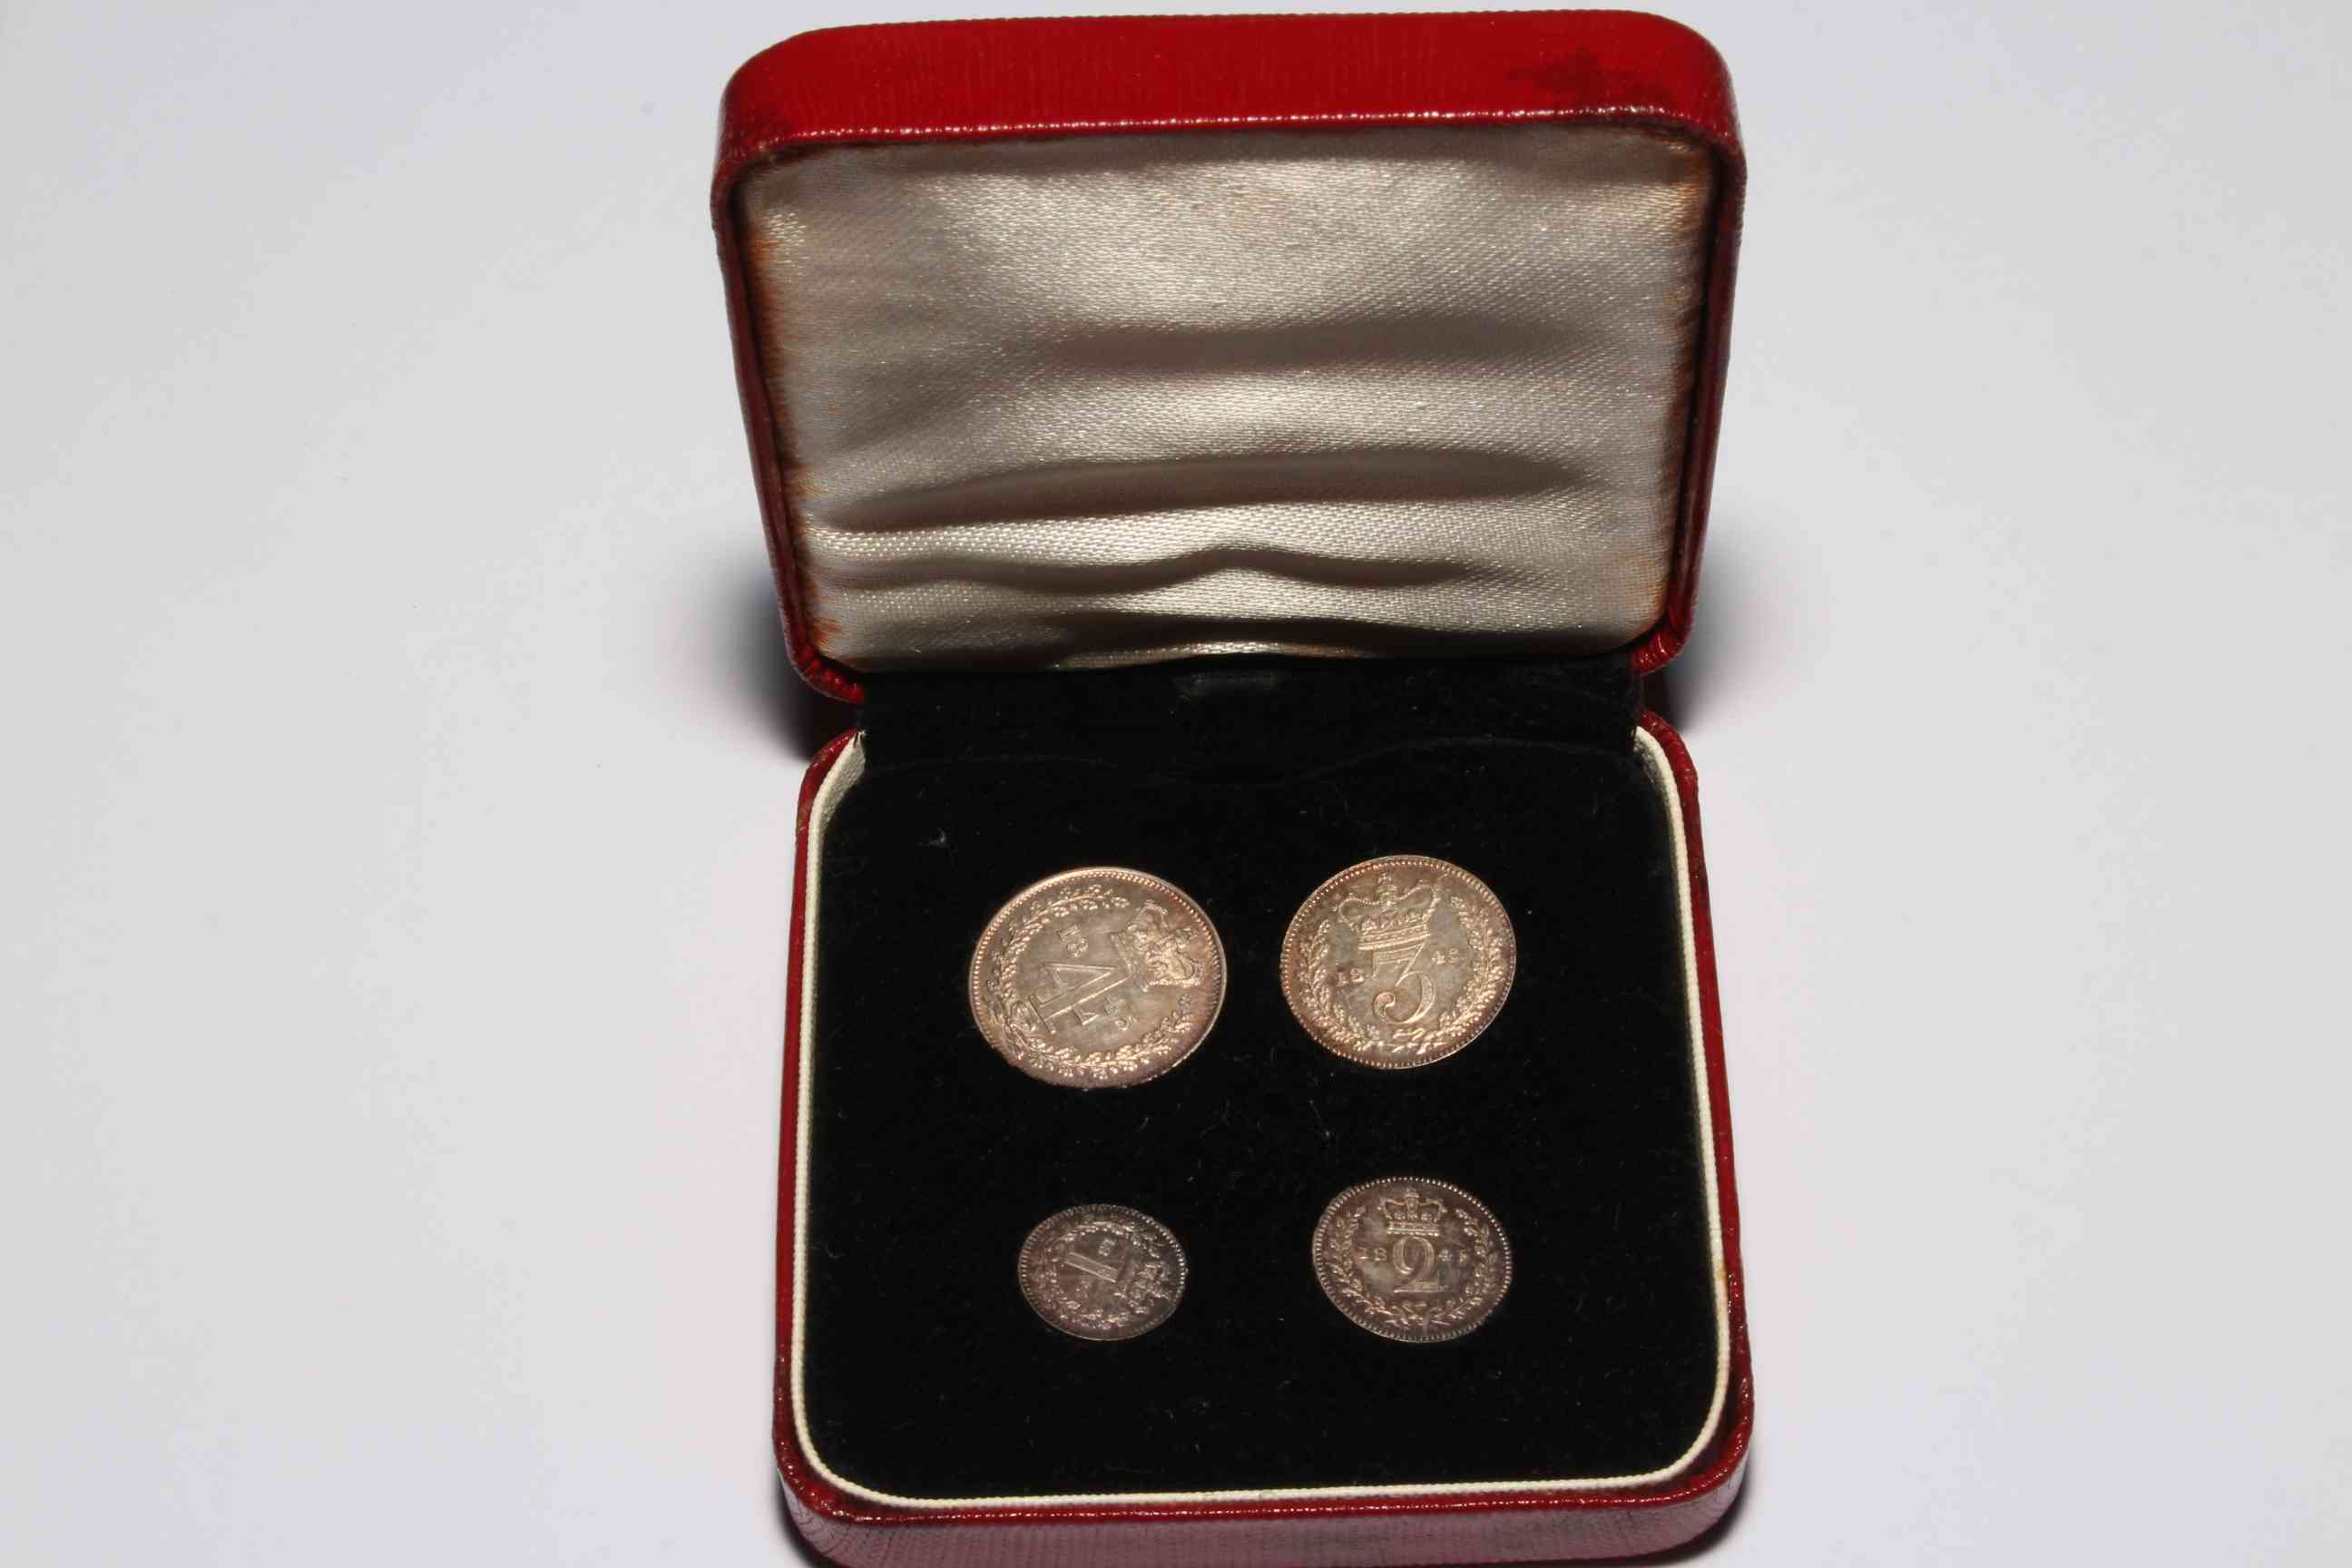 1845 Queen Victoria Maundy Set in box.